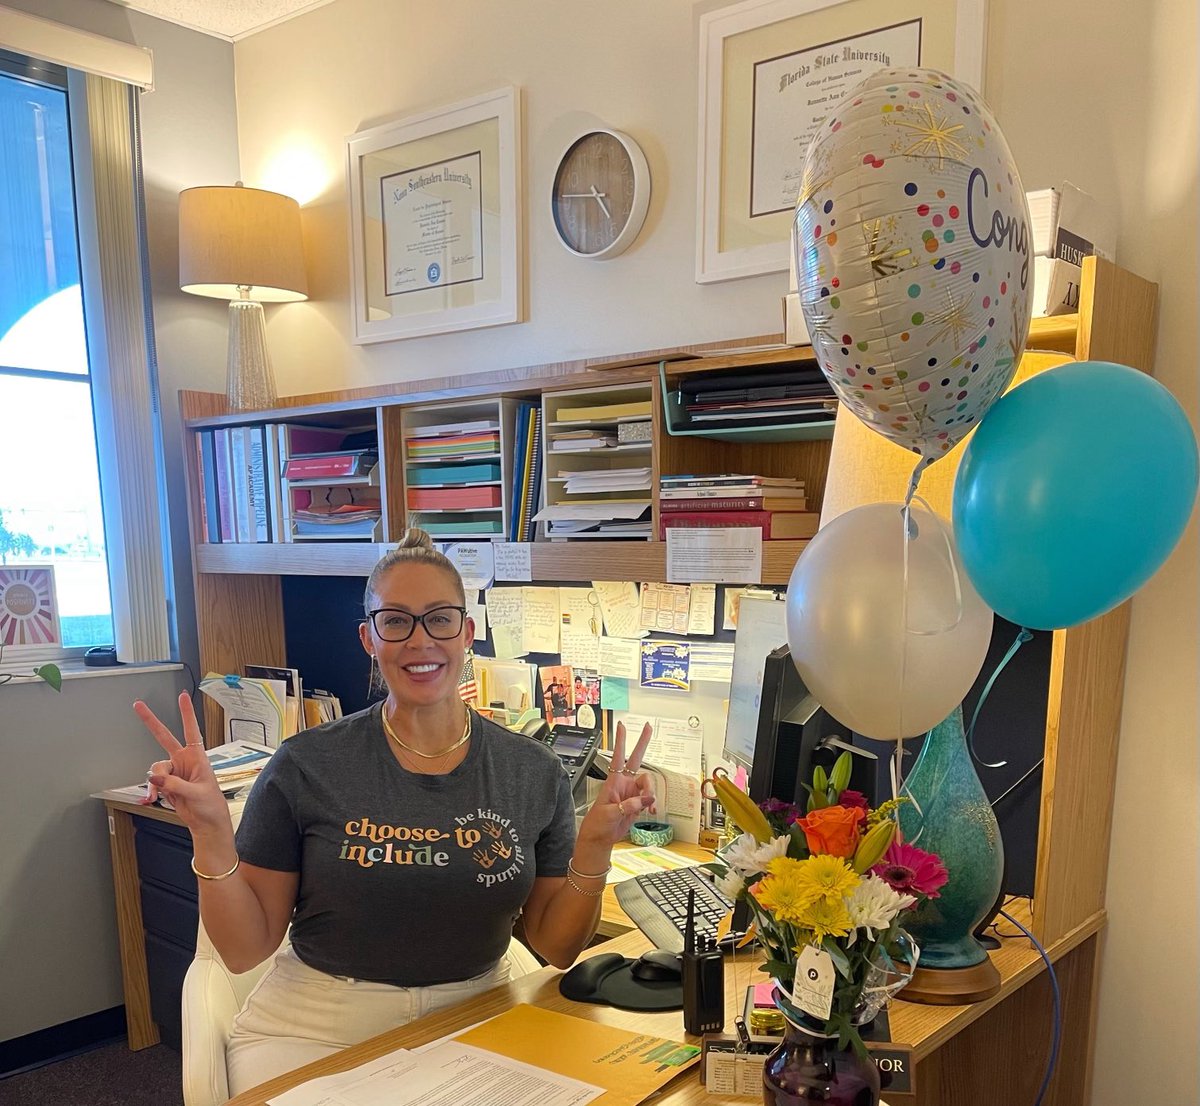 Ms. Connor, our AP of Curriculum, was nominated as Assistant Principal of the Year! She does an amazing job and we are so very fortunate to have her on our Terrier team.